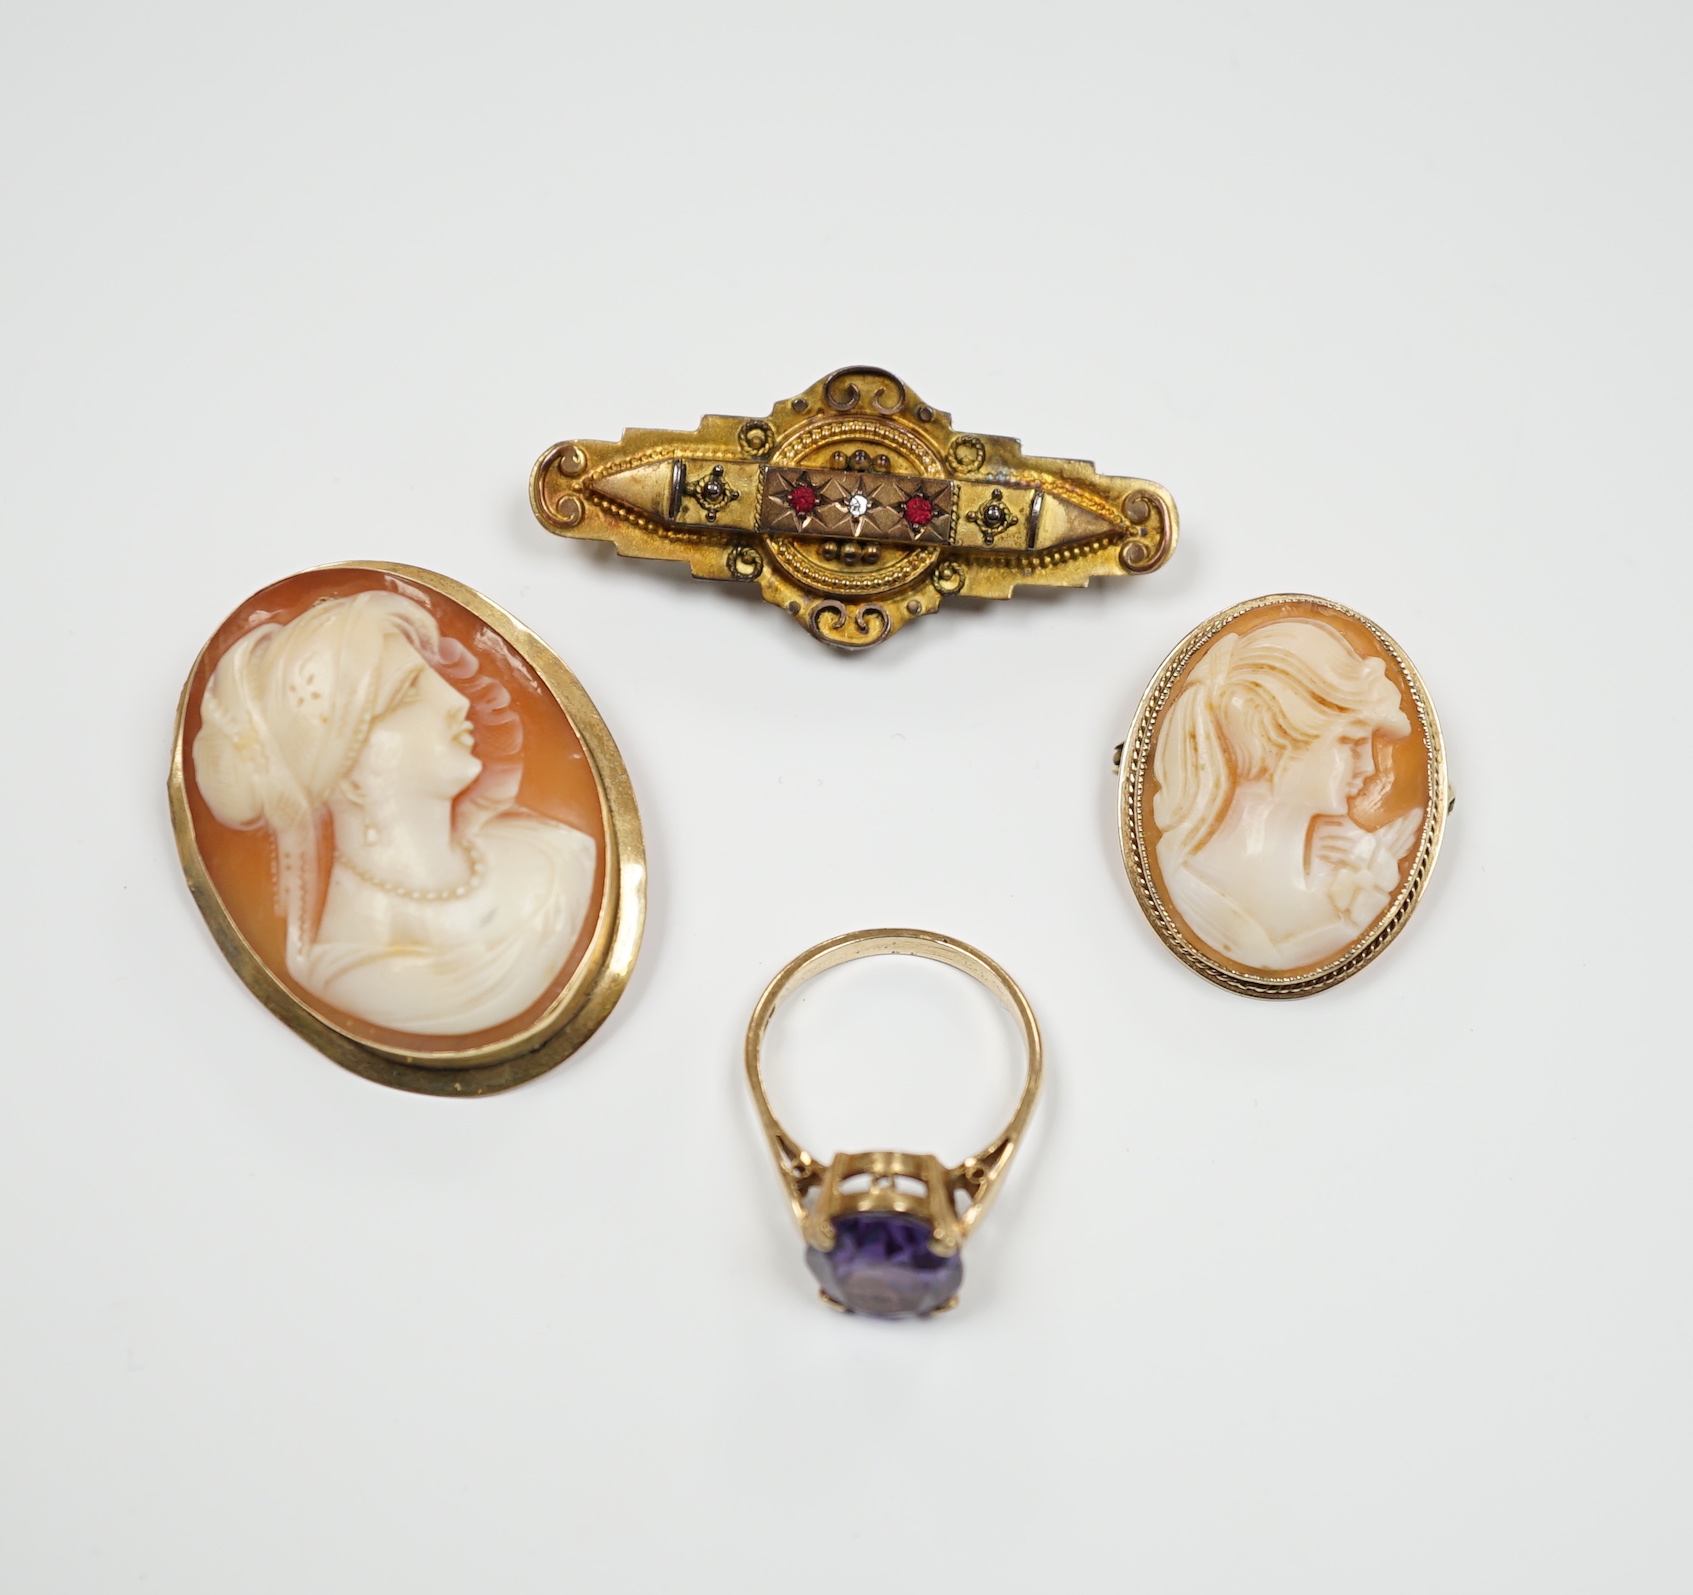 Two 9ct mounted oval cameo shell brooches, largest 38mm, a 9ct and gem set ring and a 9ct gold and gem set bar brooch.